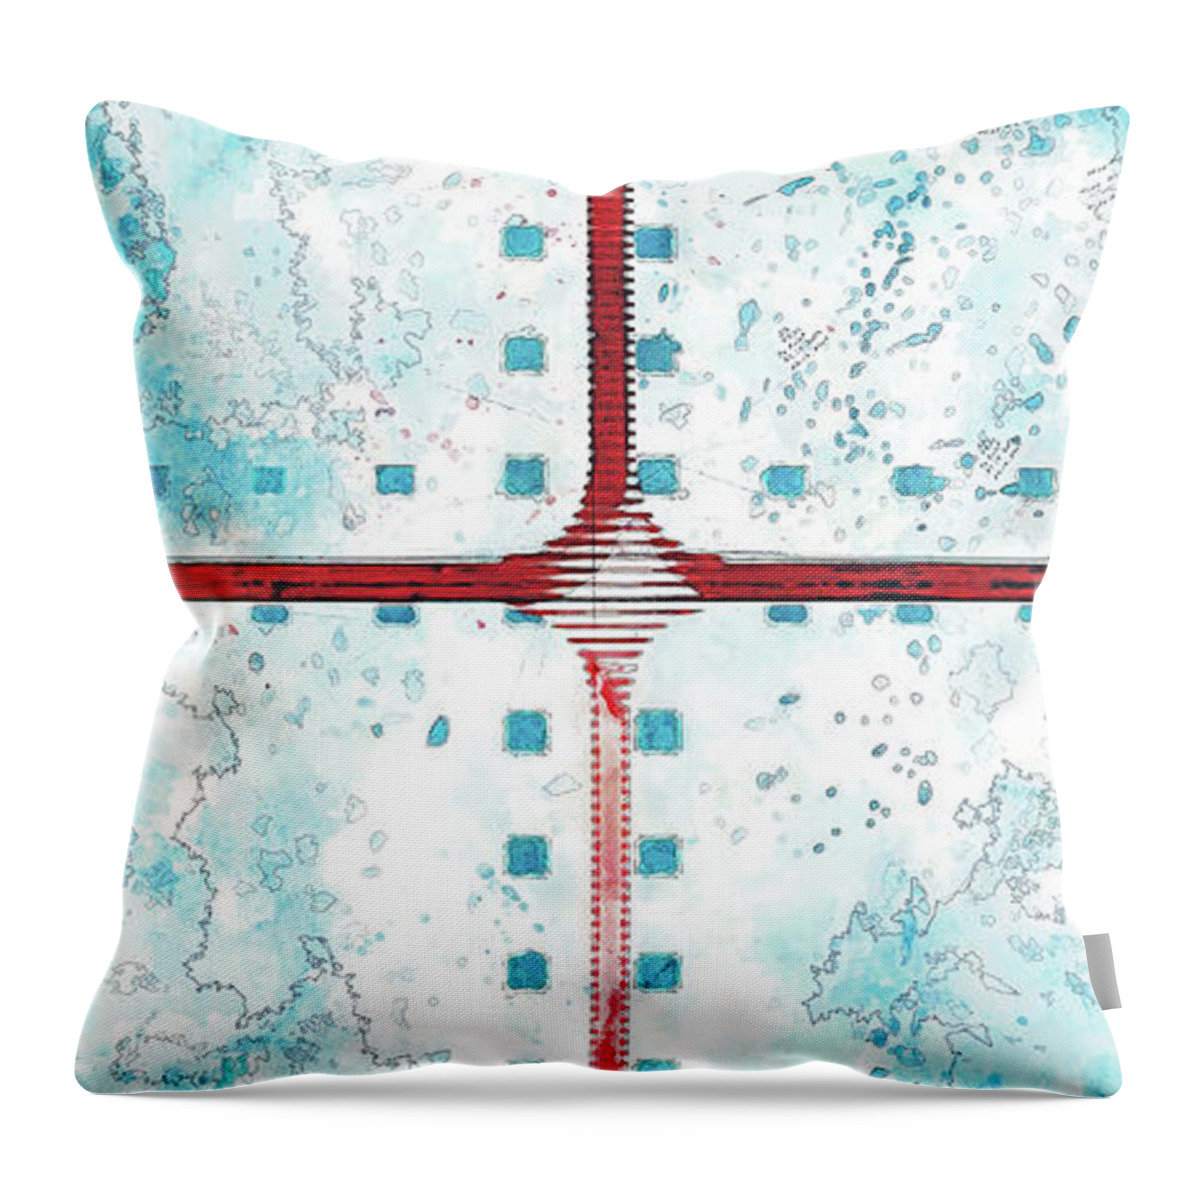 Jesus Throw Pillow featuring the digital art A blue sky by Payet Emmanuel